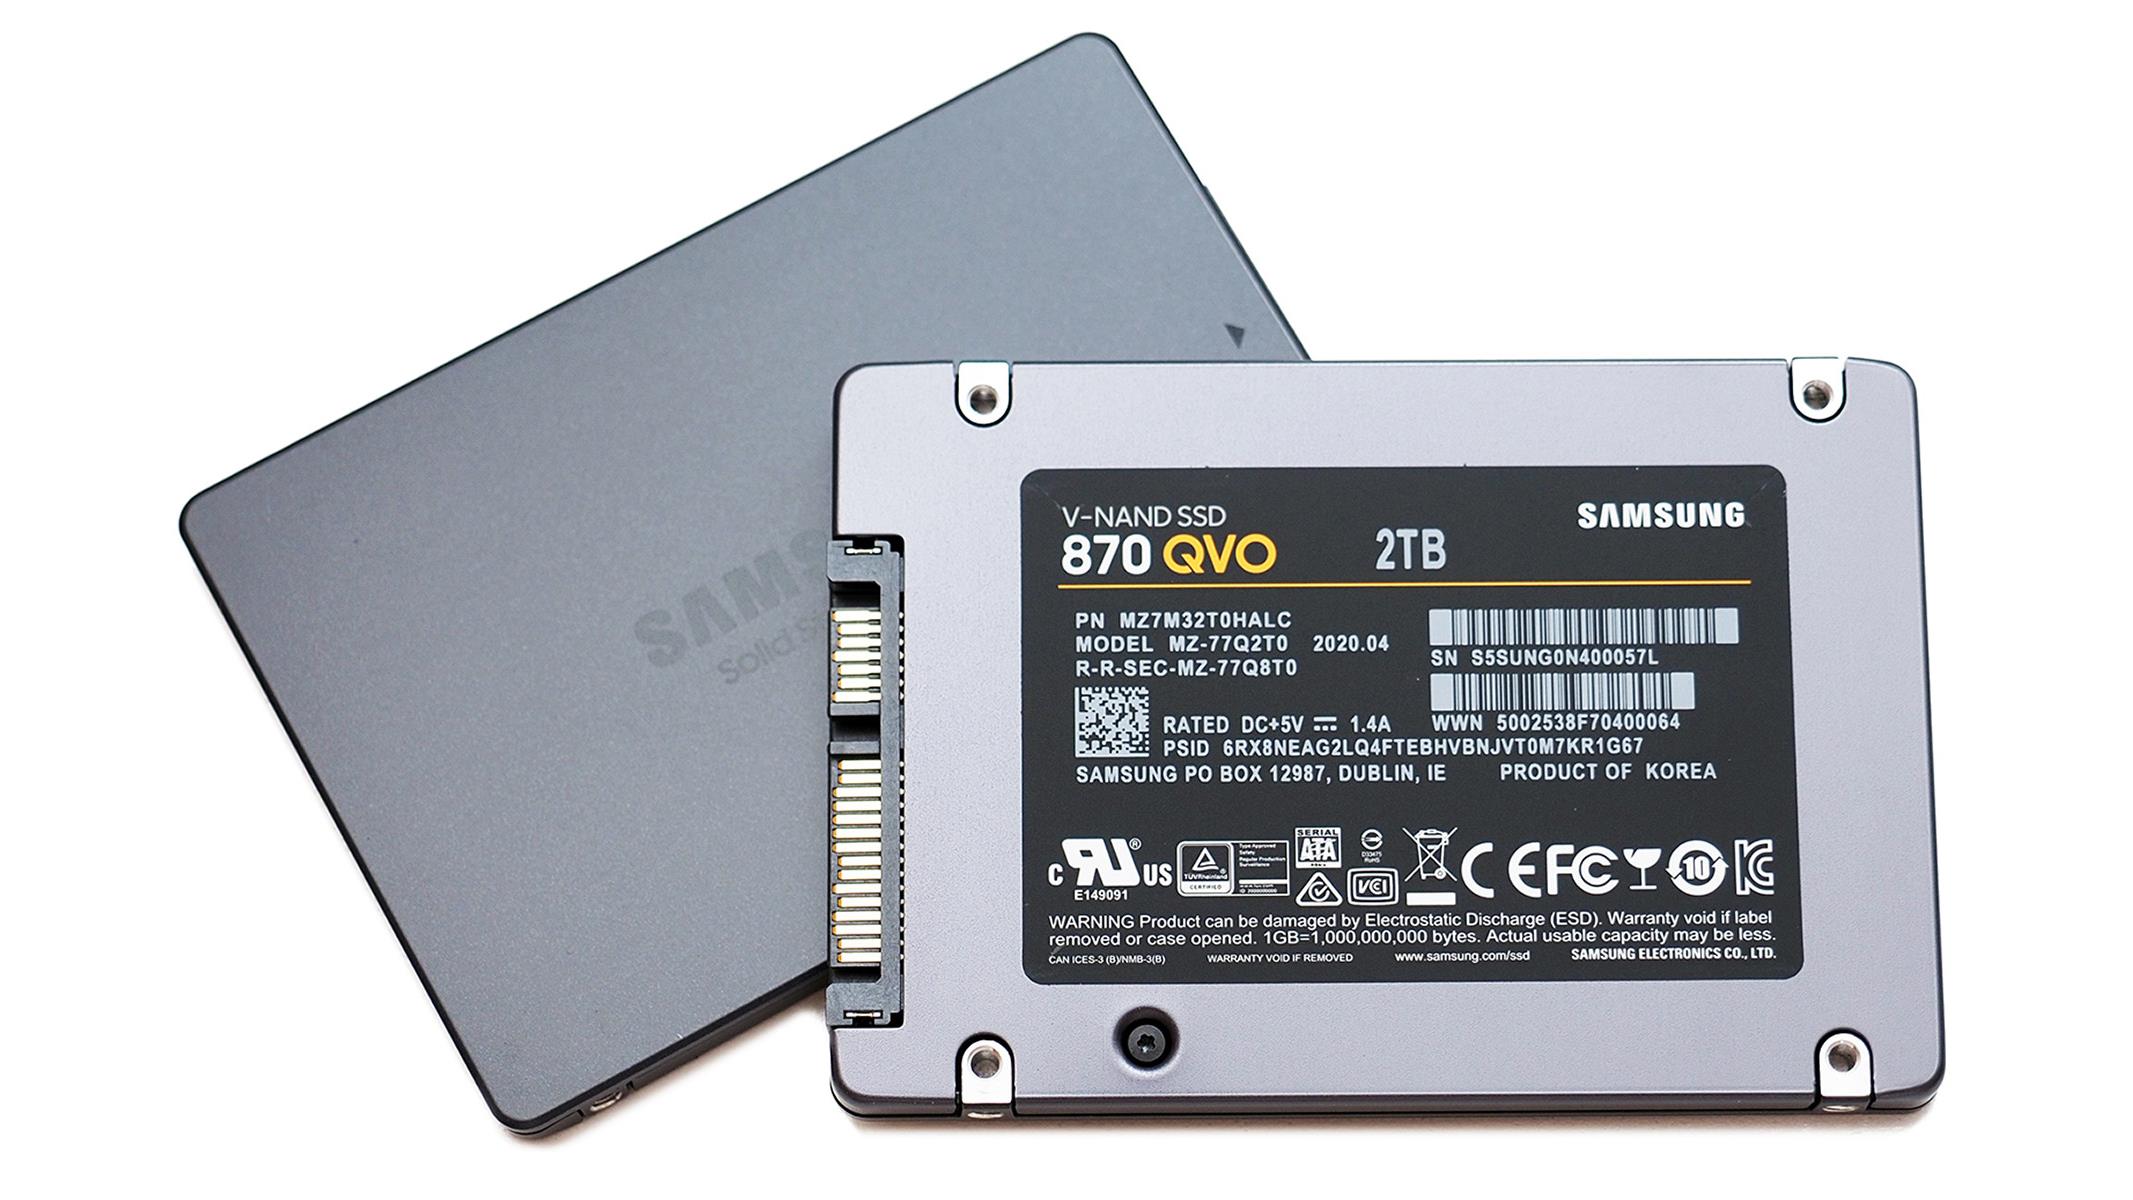 Samsung 870 QVO - High capacity promises but disappointing